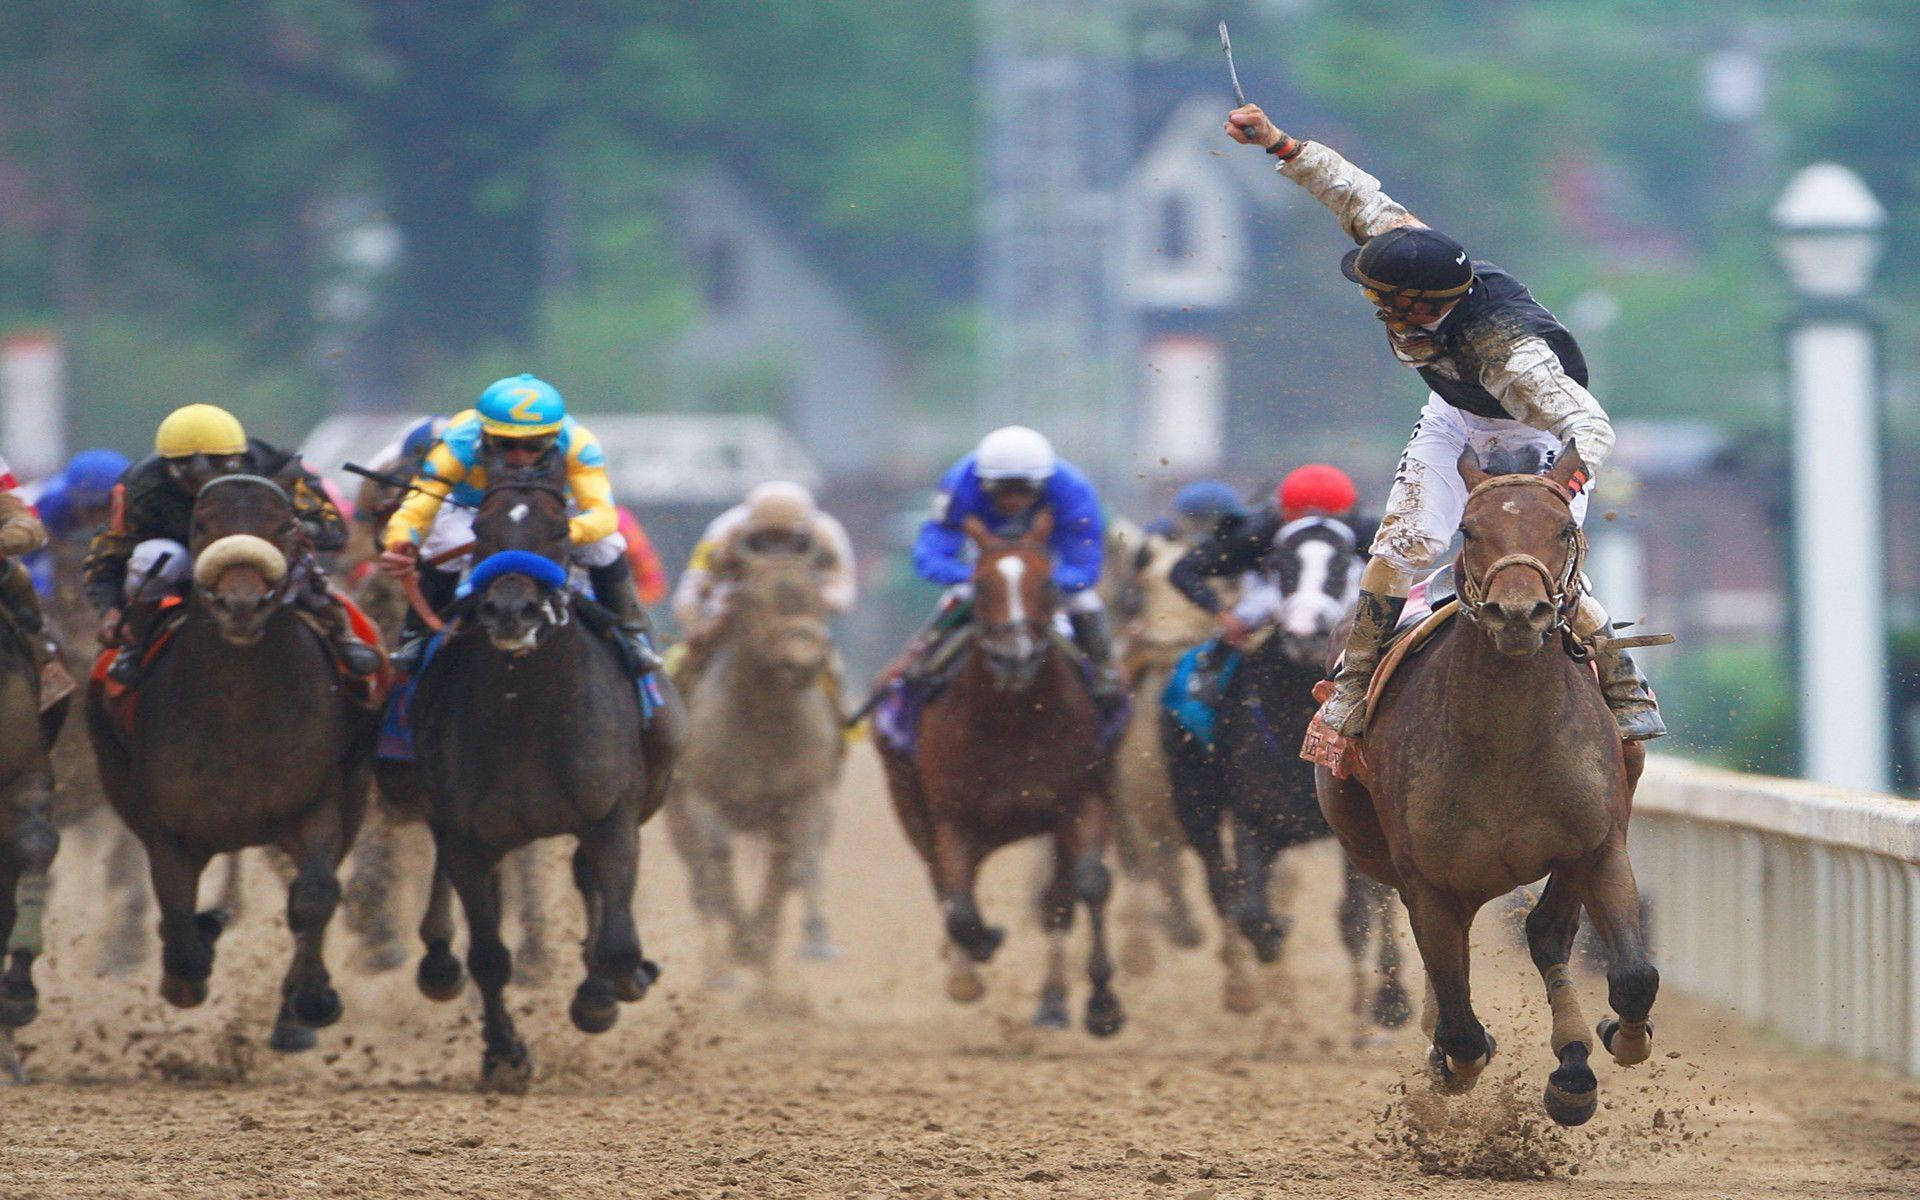 Caption: Intense Horse Racing On A Muddy Track